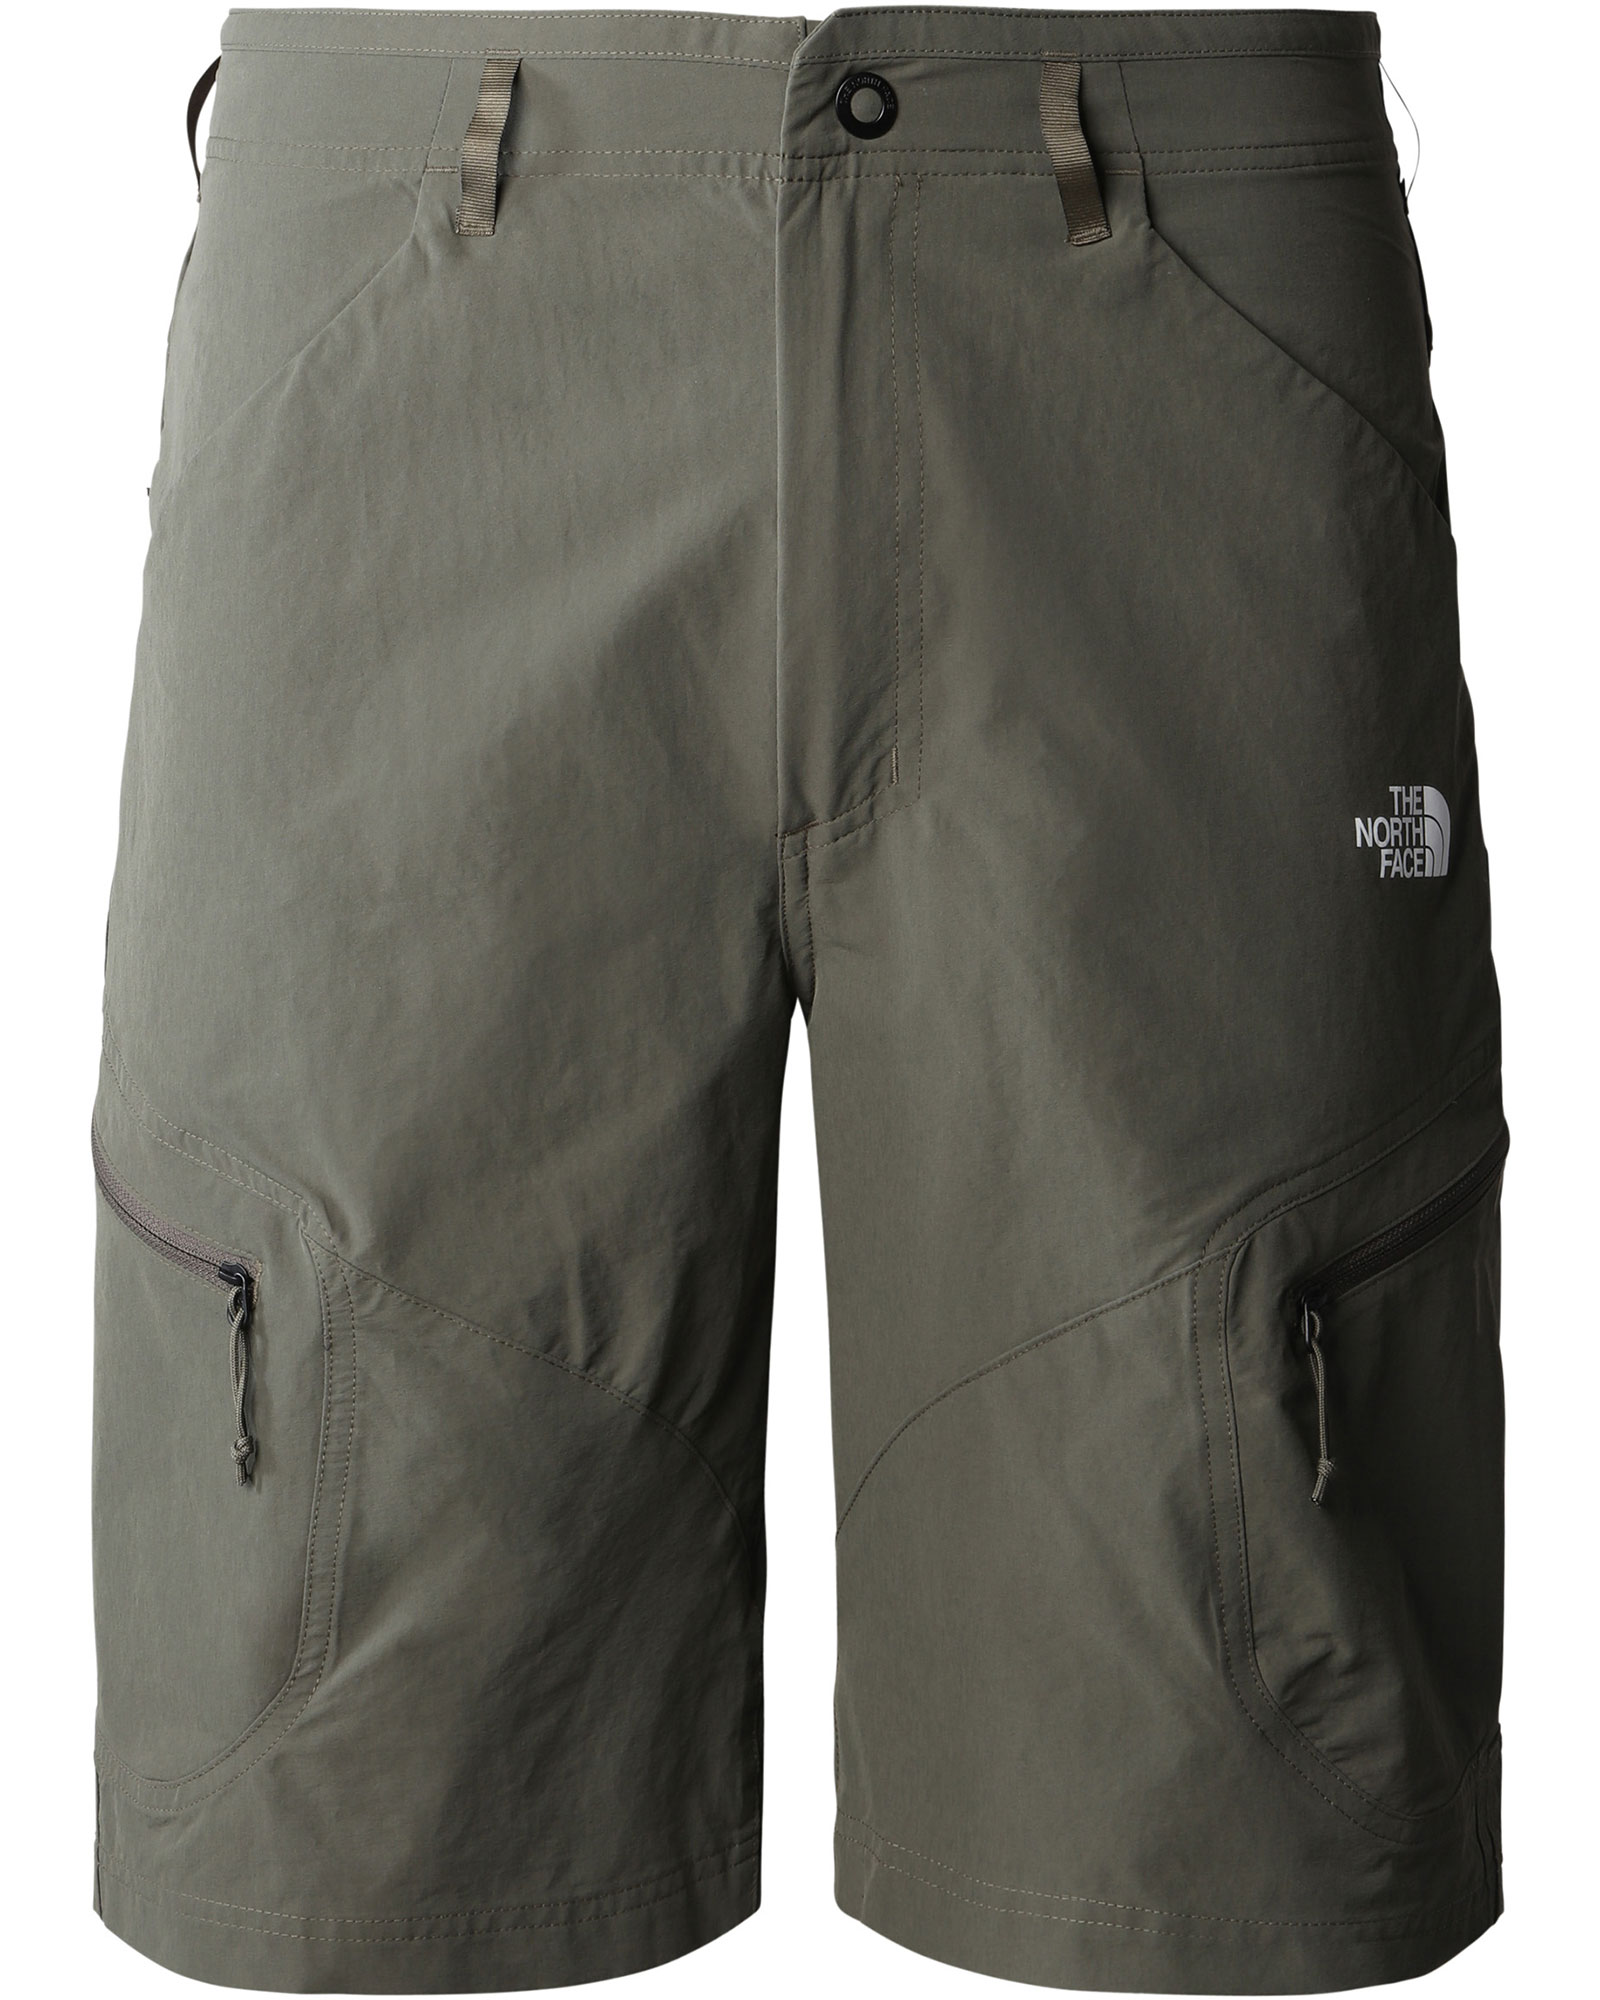 The North Face Men’s Exploration Shorts - New Taupe Green EU 34